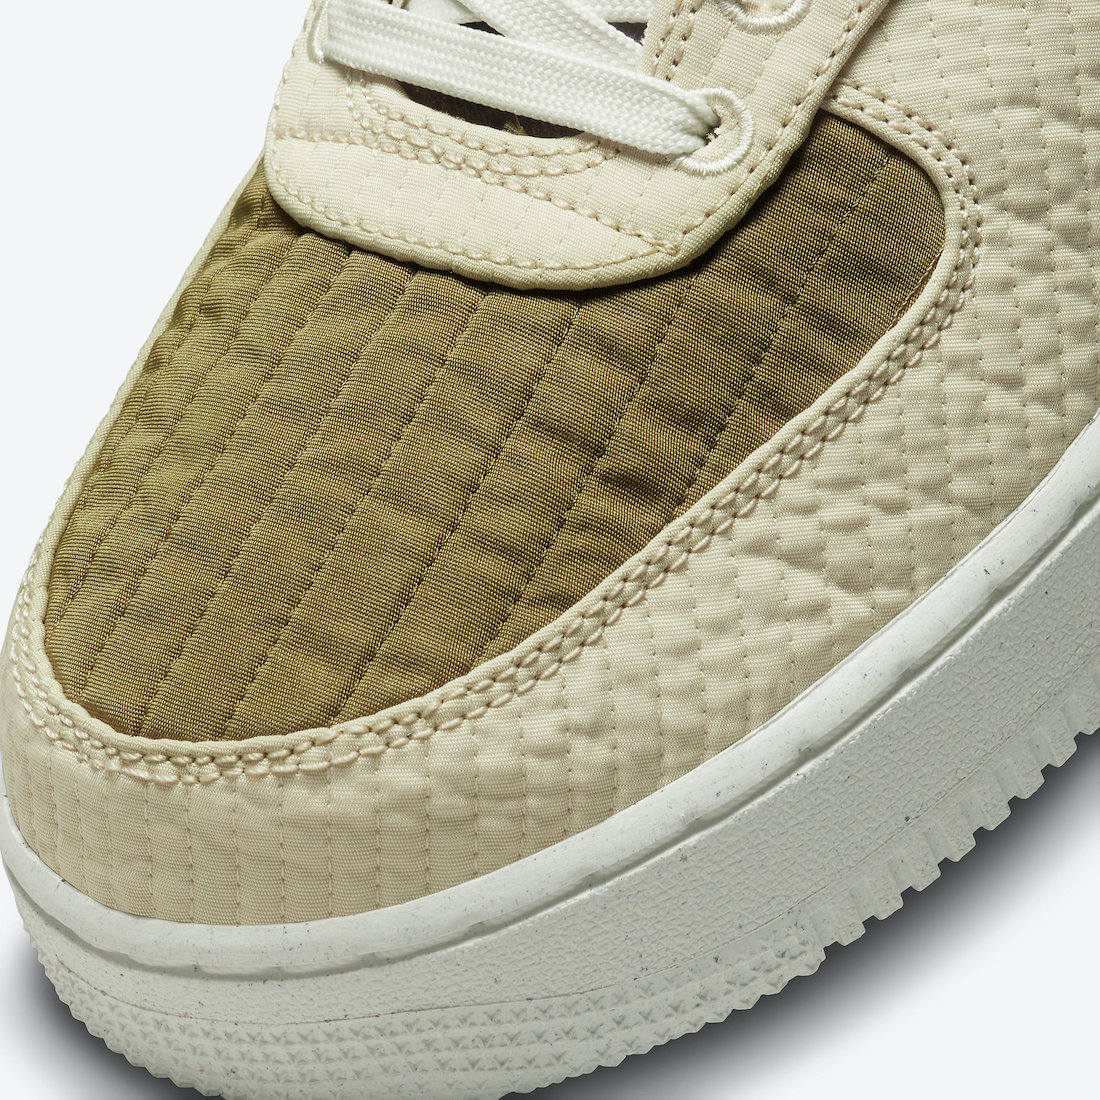 Nike Air Force 1 Low Toasty Brown Kelp Sail Rattan Cave Purple DC8744-301 Release Date Info